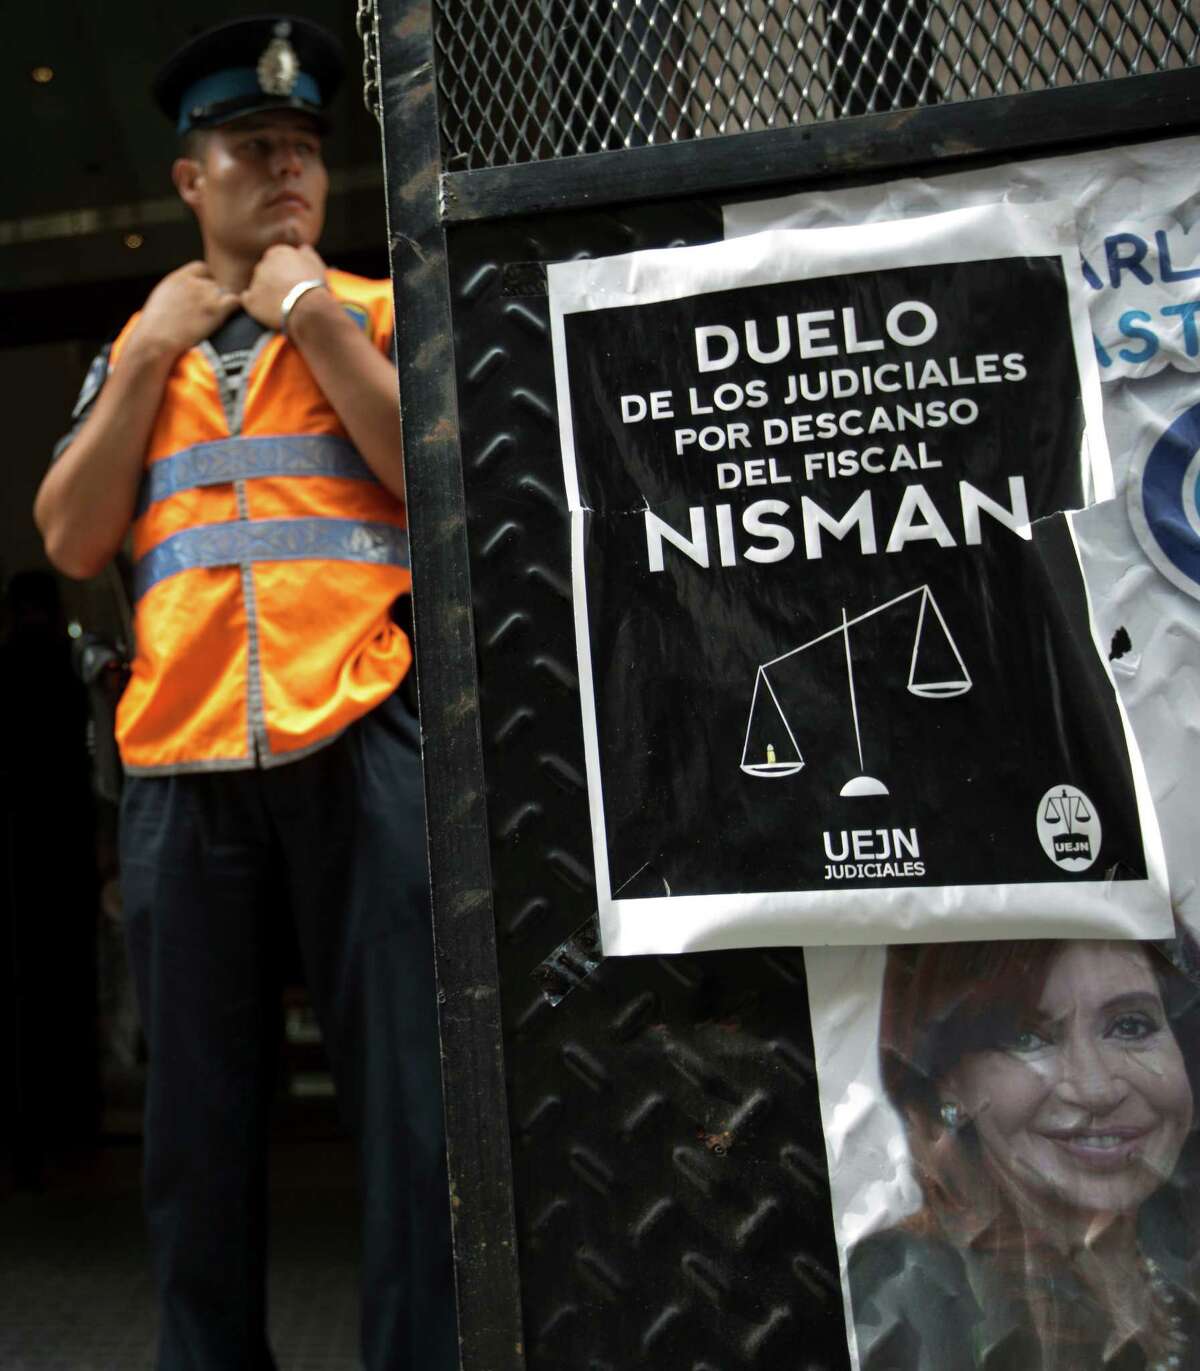 A police officer stands guard in front of he prosecutor's office that leads the investigation of prosecutor Alberto Nisman's death, in Buenos Aires, Argentina, Thursday, Feb. 5, 2015. Posted on the gate is a portrait of Argentina's President Cristina Fernandez along with another poster that reads in Spanish "Mourning of judicial workers due to the death of prosecutor Nisman." Investigators examining the death of Nisman who accused President Fernandez of agreeing to shield the alleged masterminds of a 1994 terror bombing said Tuesday they found a draft document he wrote requesting her arrest. (AP Photo/Rodrigo Abd)